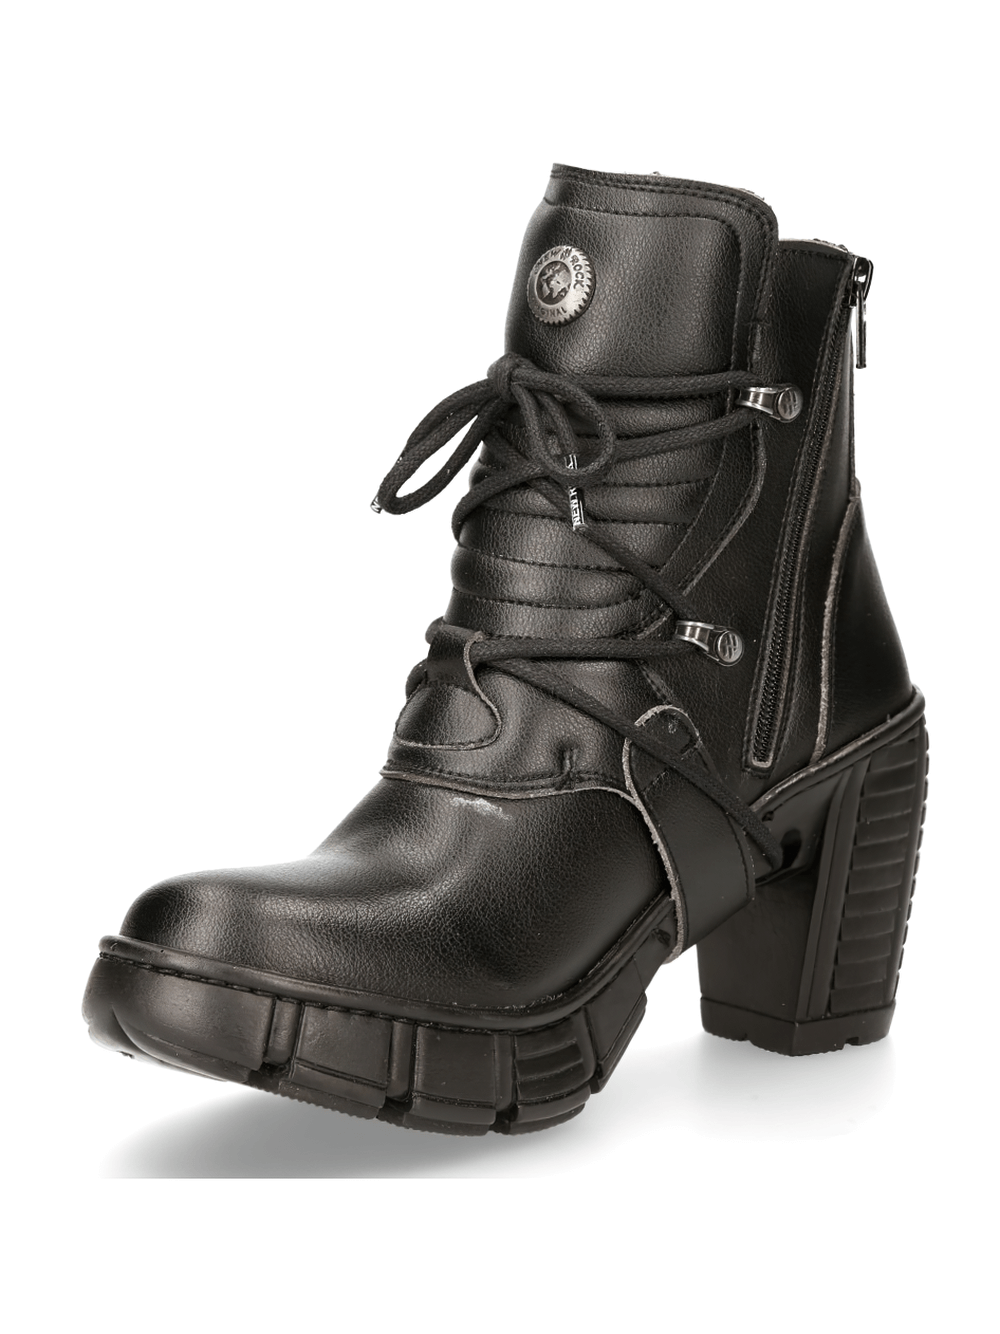 NEW ROCK Gothic Black Buckled Lace-Up Ankle Boots